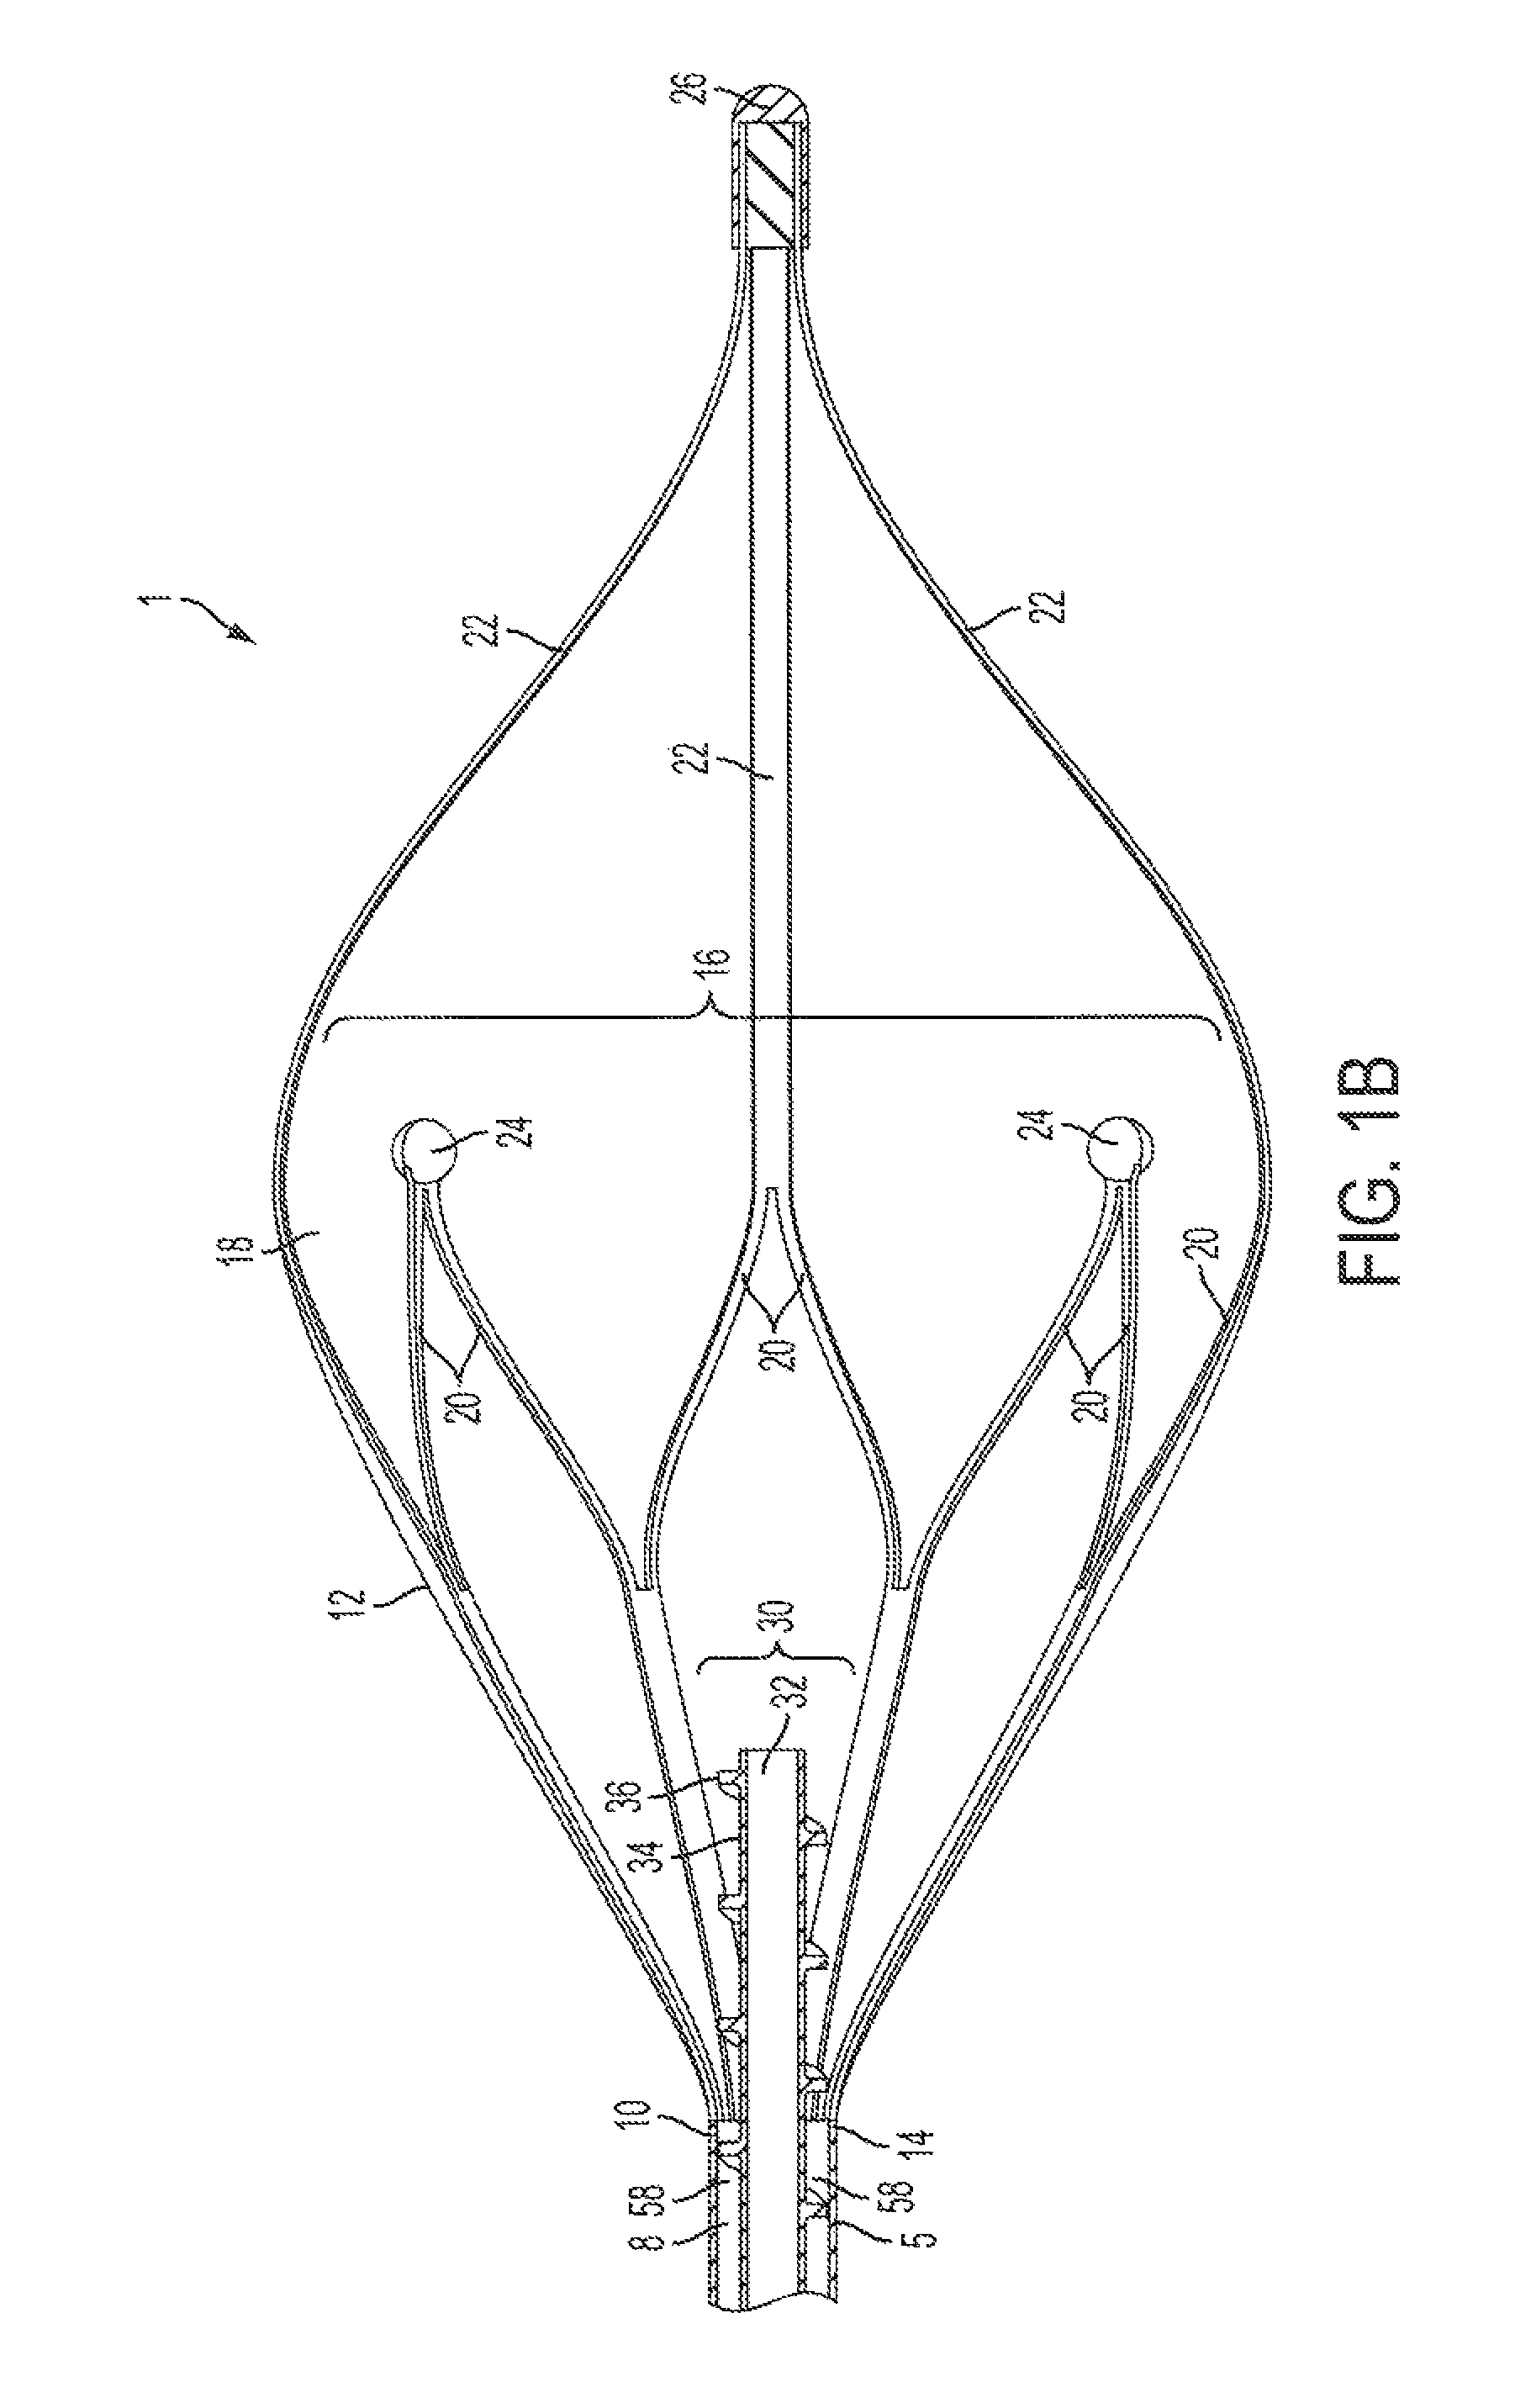 Device and method for removing material from a hollow anatomical structure